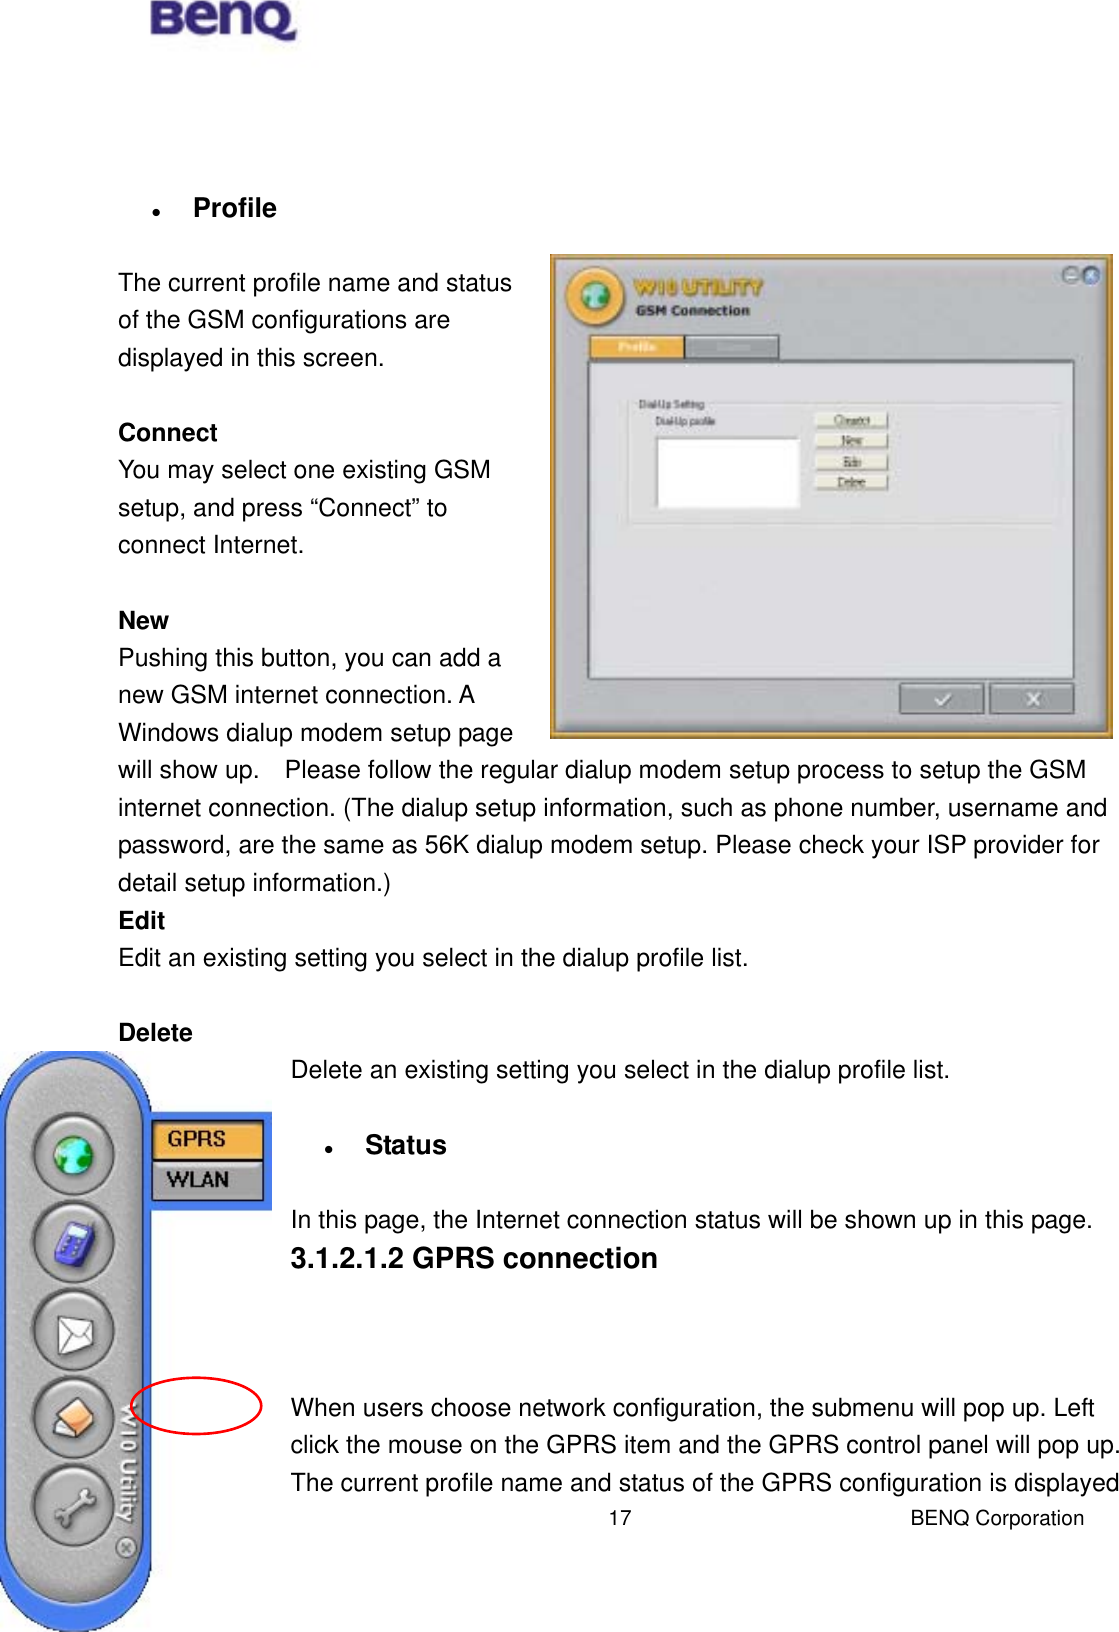  BENQ Corporation 17     Profile  The current profile name and status of the GSM configurations are displayed in this screen.      Connect You may select one existing GSM setup, and press “Connect” to connect Internet.  New Pushing this button, you can add a new GSM internet connection. A Windows dialup modem setup page will show up.    Please follow the regular dialup modem setup process to setup the GSM internet connection. (The dialup setup information, such as phone number, username and password, are the same as 56K dialup modem setup. Please check your ISP provider for detail setup information.) Edit Edit an existing setting you select in the dialup profile list.  Delete Delete an existing setting you select in the dialup profile list.    Status  In this page, the Internet connection status will be shown up in this page.     3.1.2.1.2 GPRS connection    When users choose network configuration, the submenu will pop up. Left click the mouse on the GPRS item and the GPRS control panel will pop up. The current profile name and status of the GPRS configuration is displayed 